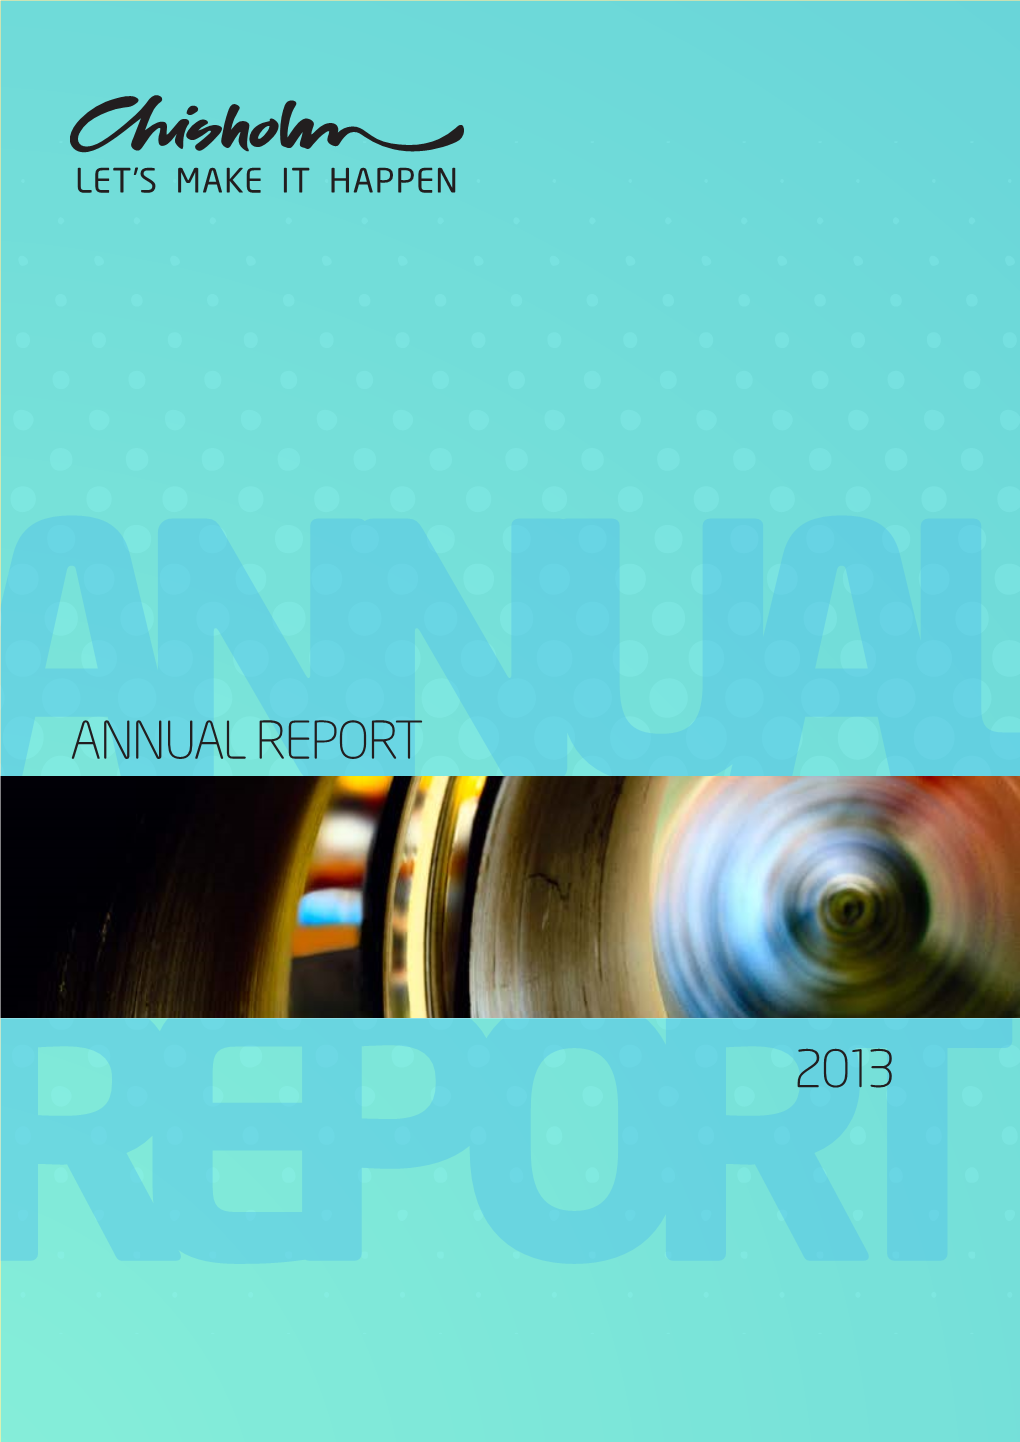 2013 Annual Report Is a Report to the Parliament of Victoria Required Under Section 45 of the Financial Management Act 1994